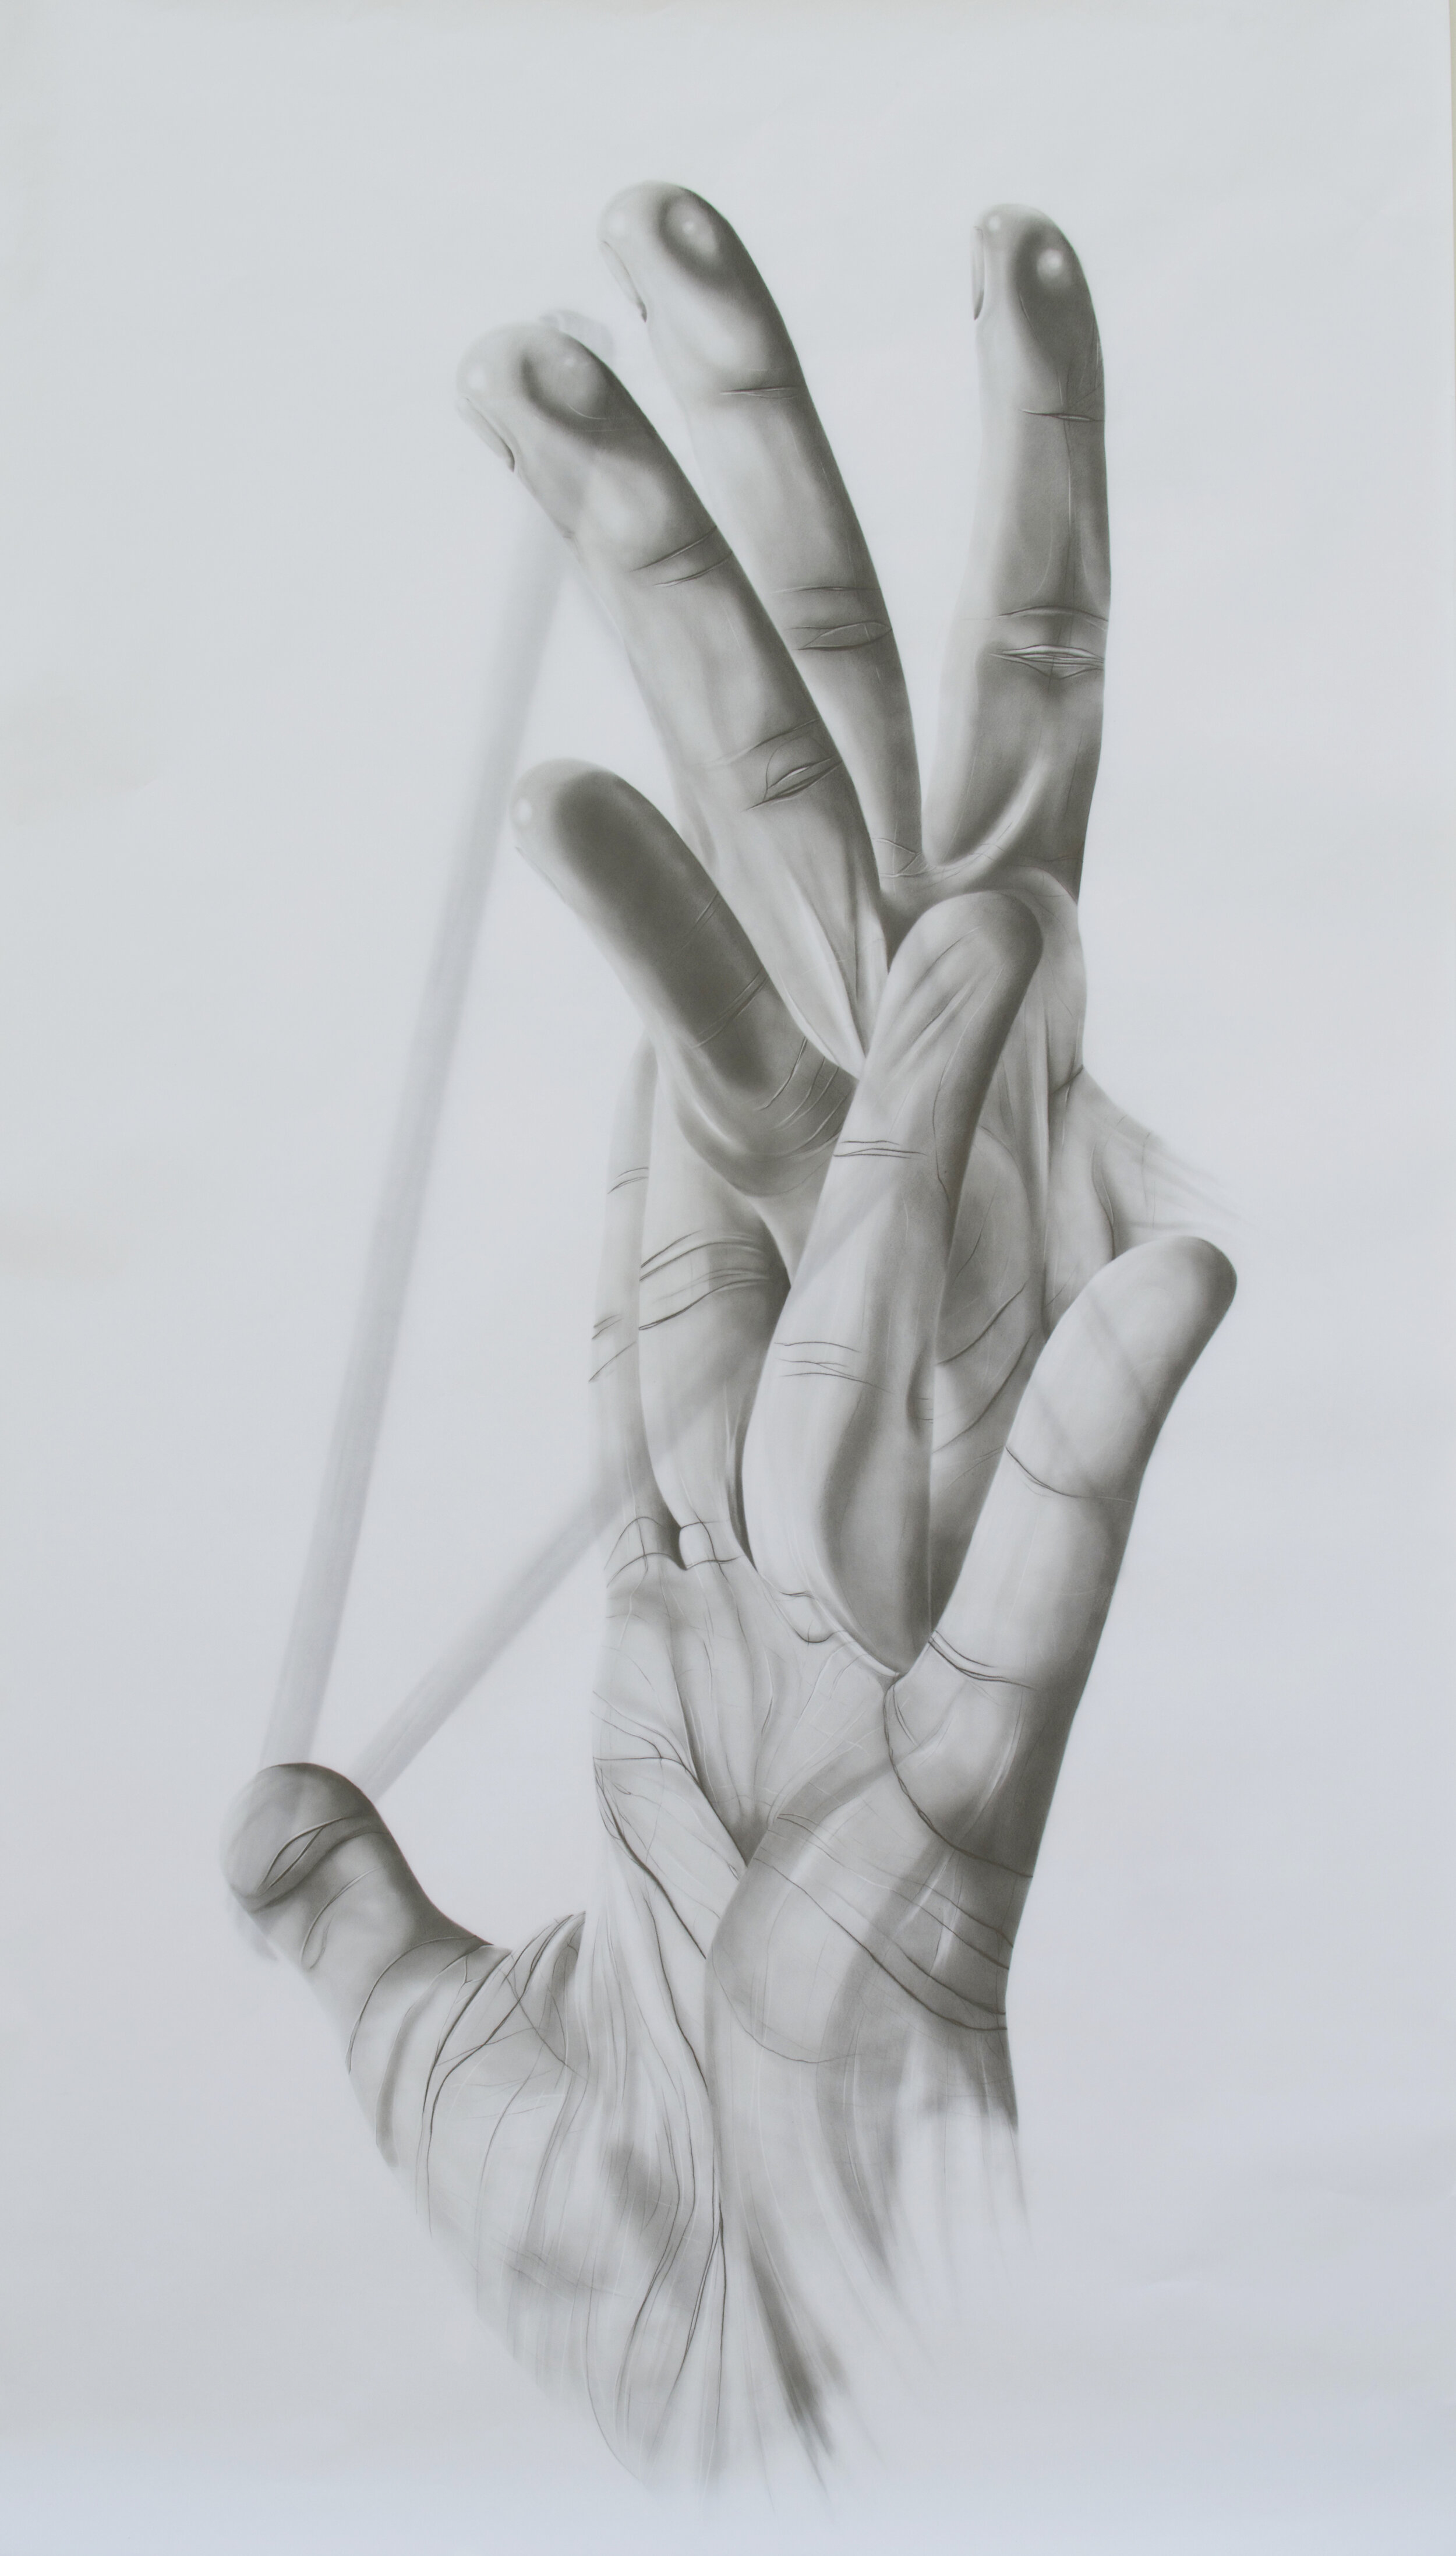  2020, Layered pencil drawings on translucent paper, 6 feet x 3.5 feet 